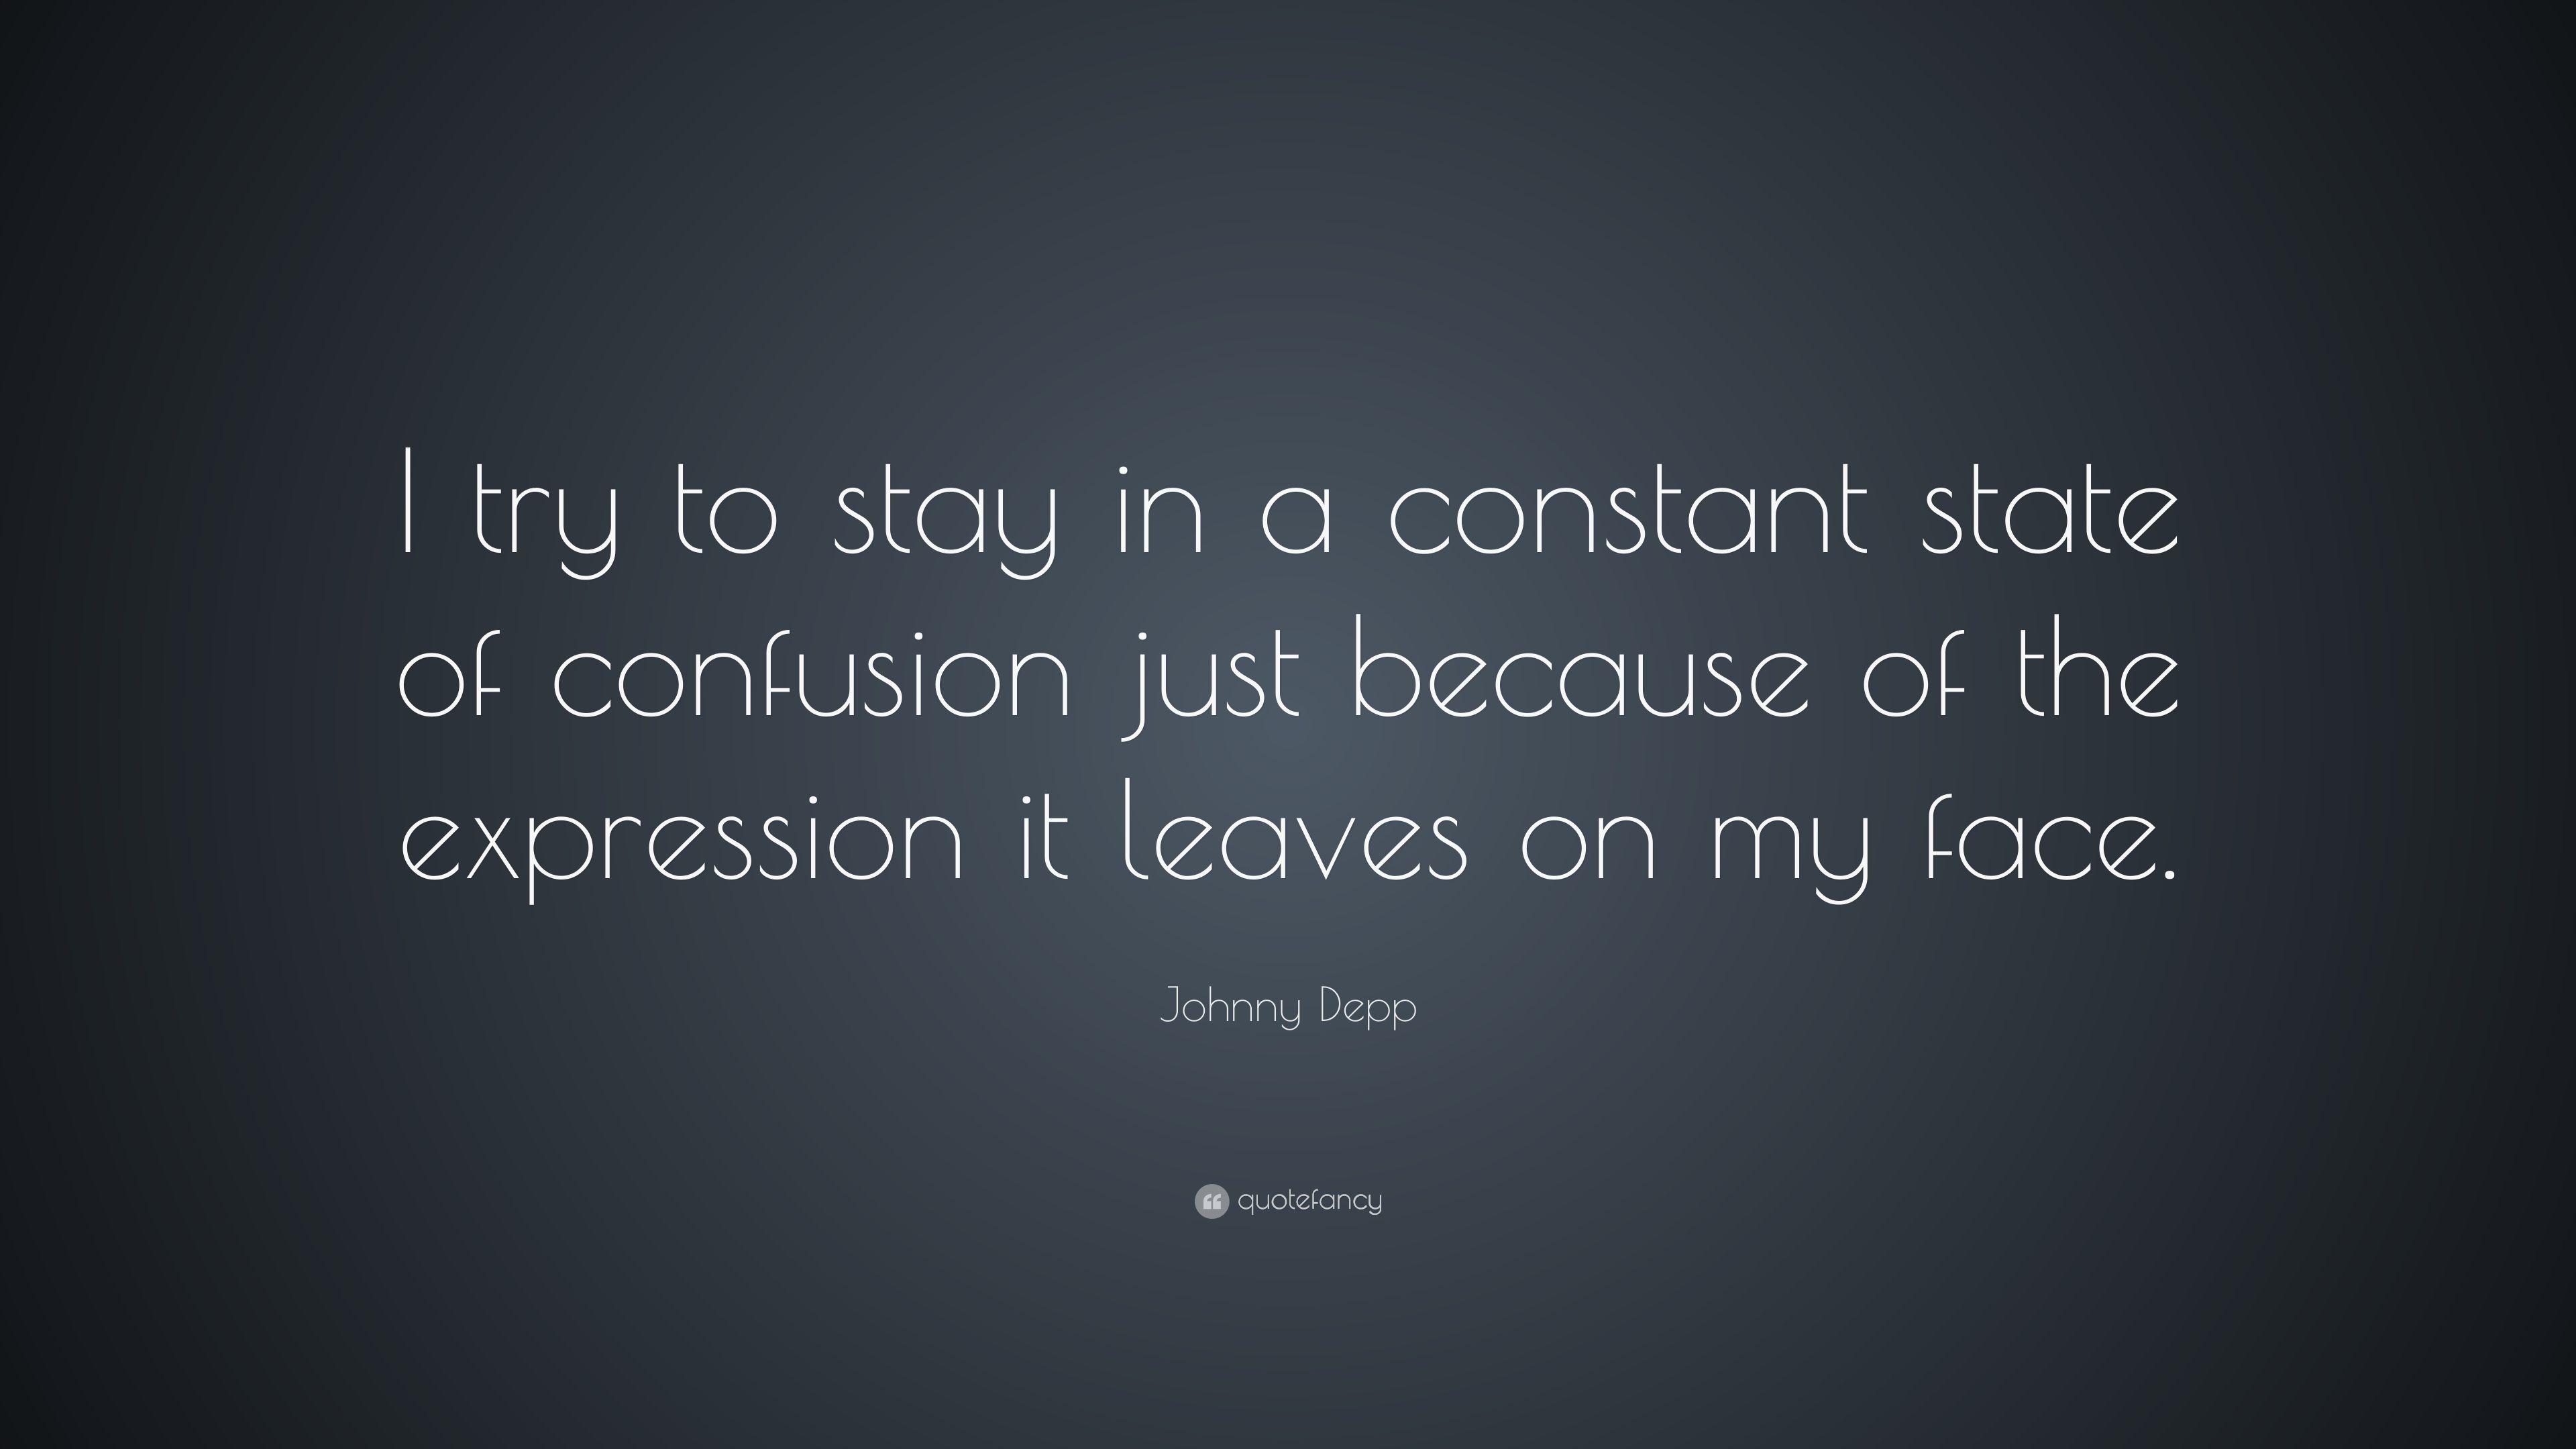 Johnny Depp Quote: “I try to stay in a constant state of confusion